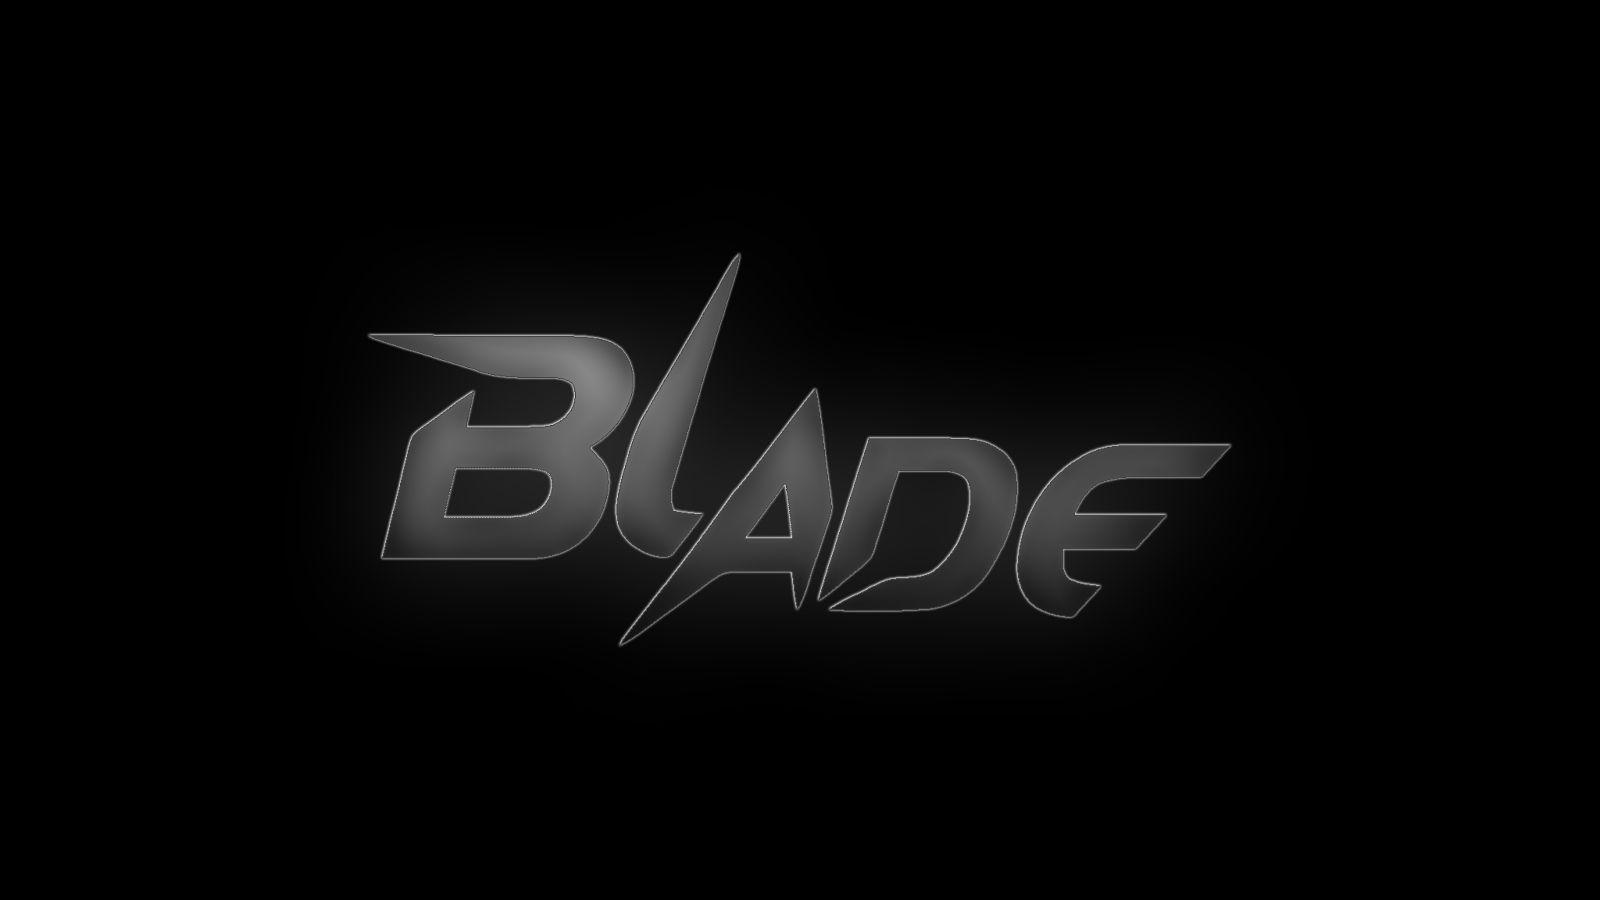 Blade Logo - Lets Make Awesome Things With The ZTE Blade Logo! - Page 4 - ZTE ...